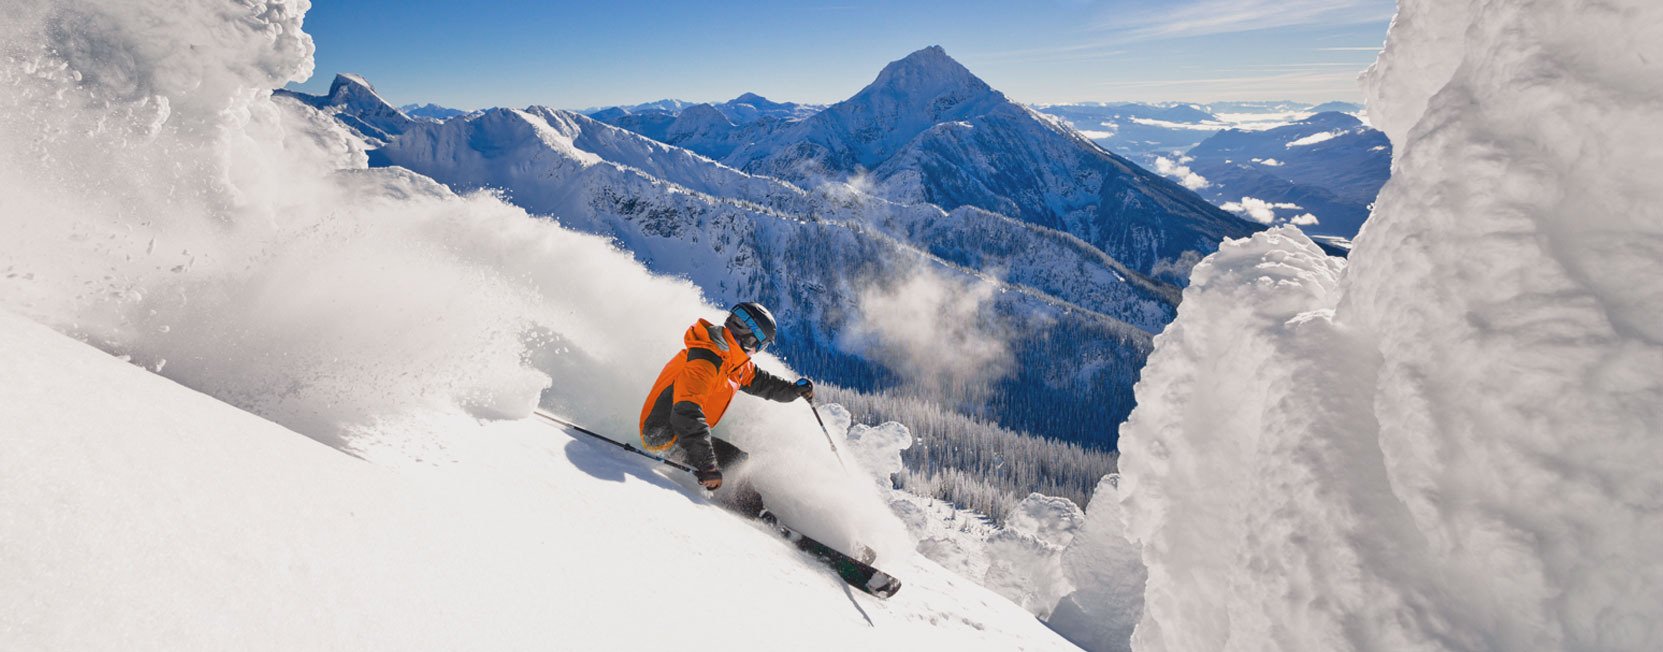 Ski Vacation Package - Save 20% at the Sutton Place Revelstoke! Book by 8/31/23